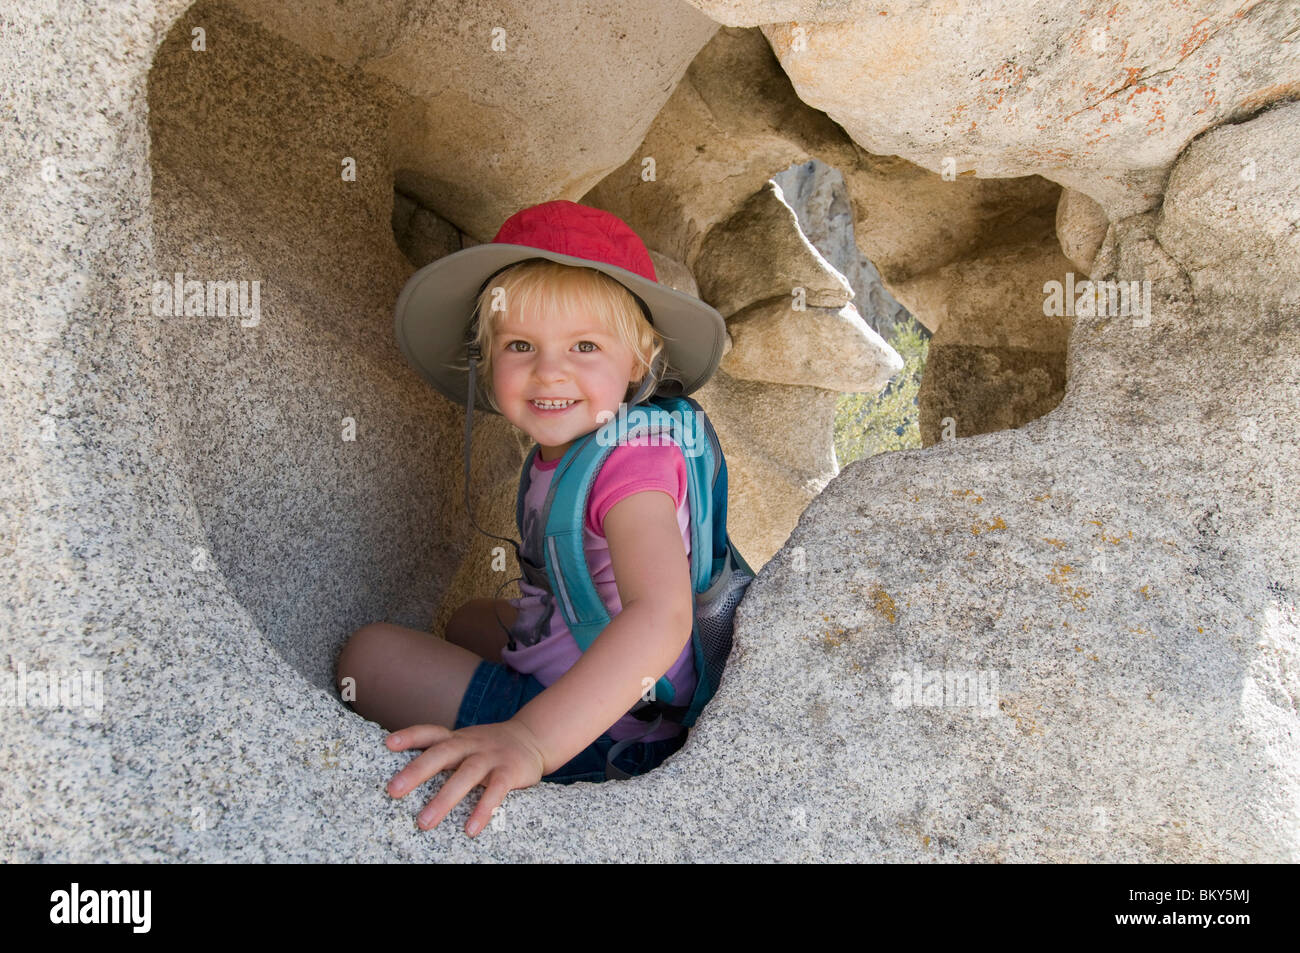 A young smiling girl in a granite cave in the City of Rocks National Reserve, Almo, Idaho. Stock Photo